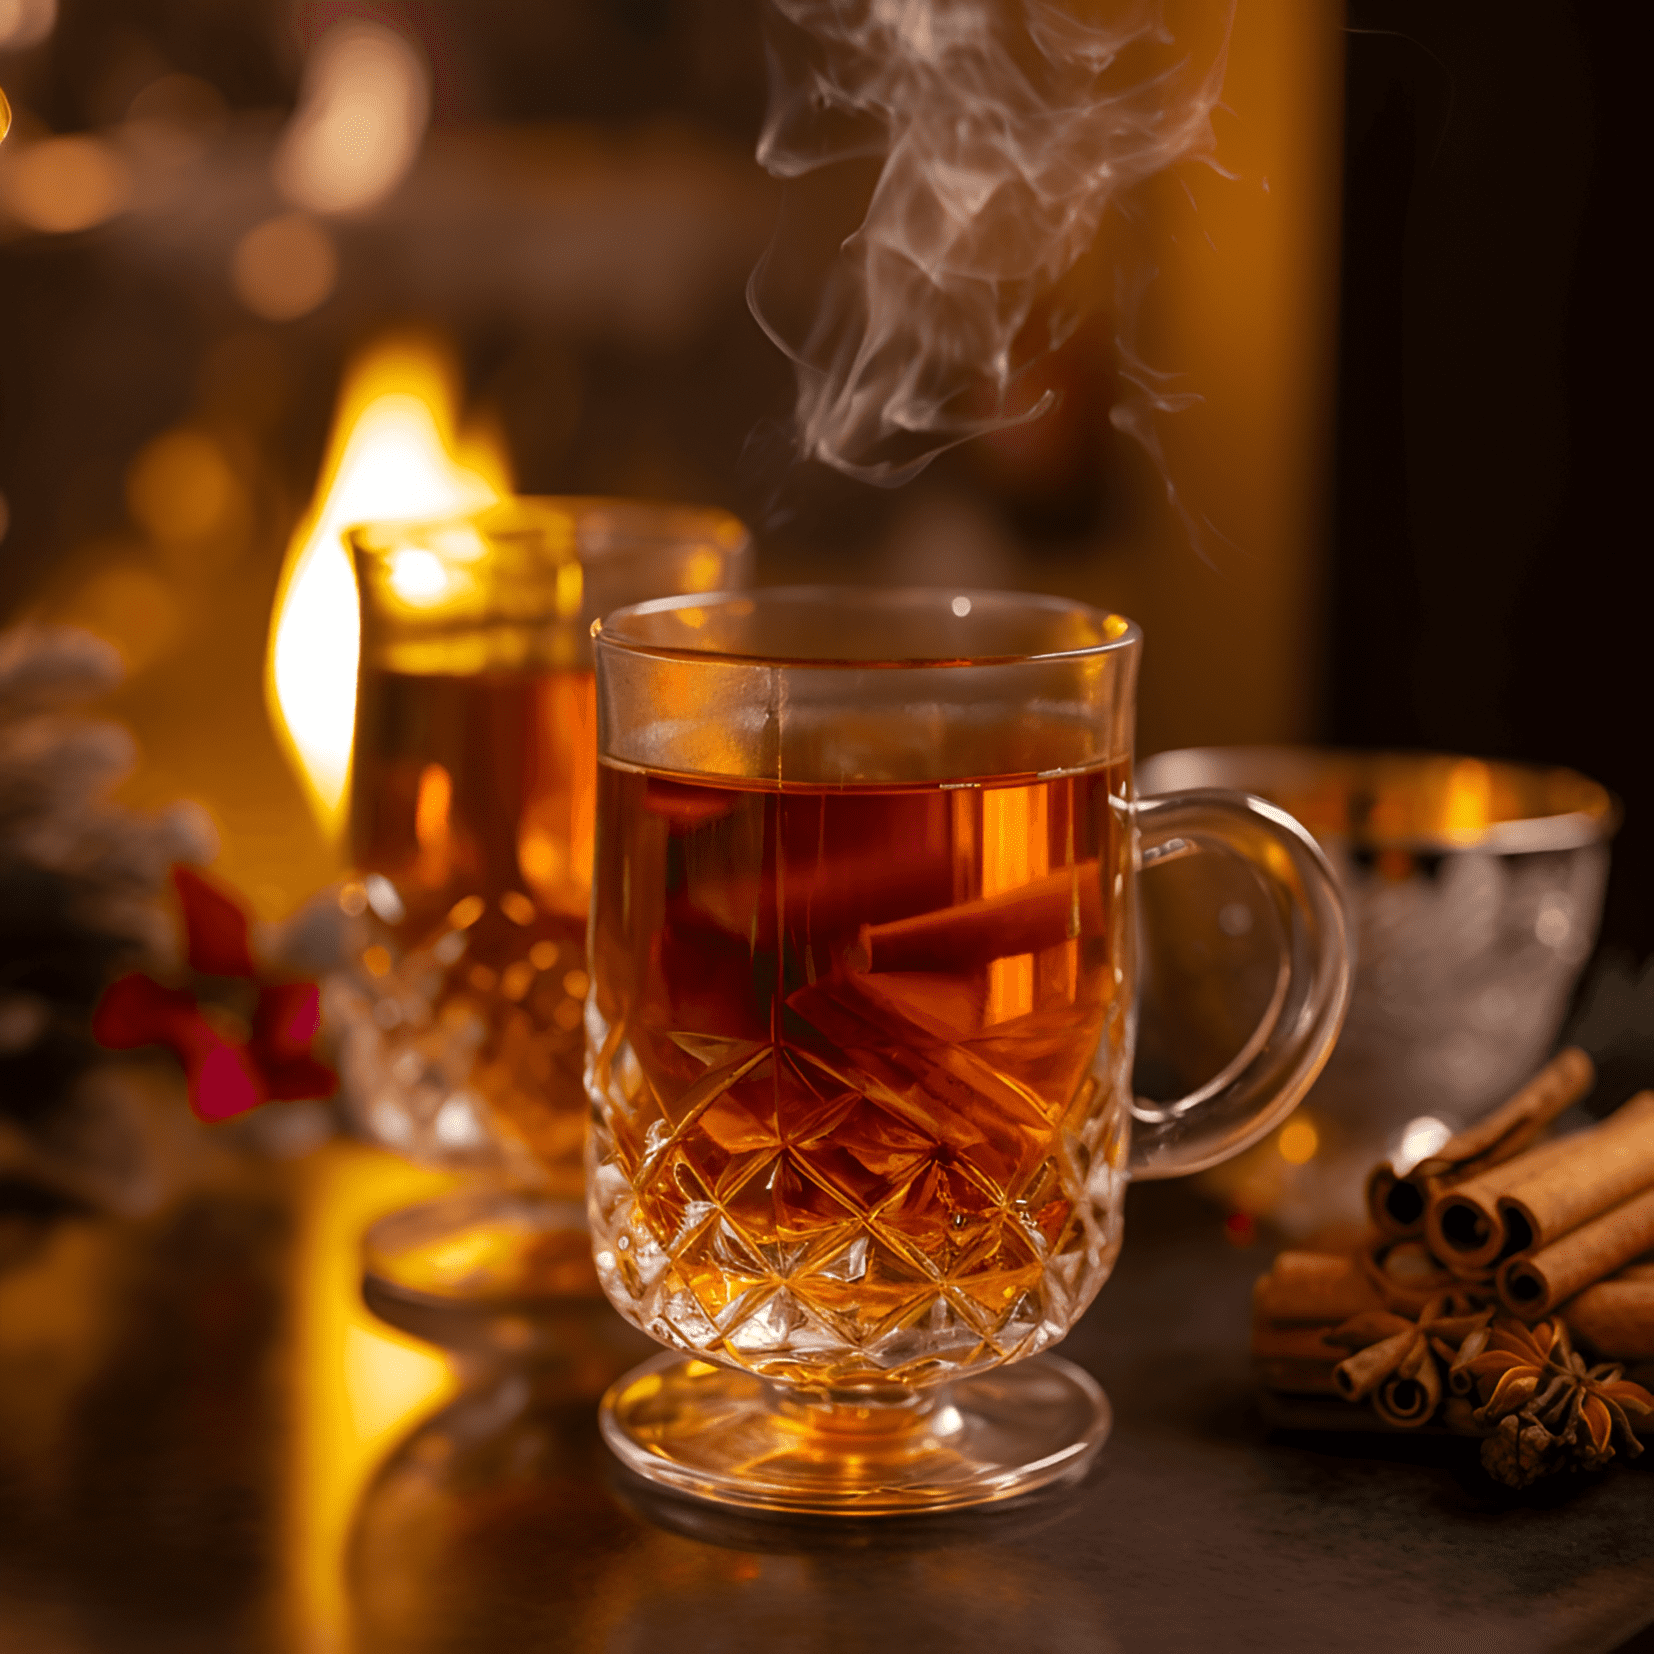 Hot Toddy Cocktail Recipe - The Hot Toddy is a warm, soothing, and comforting cocktail with a perfect balance of sweet, sour, and spicy flavors. The sweetness of honey and the warmth of whiskey are complemented by the tanginess of lemon and the subtle spiciness of cinnamon and cloves.